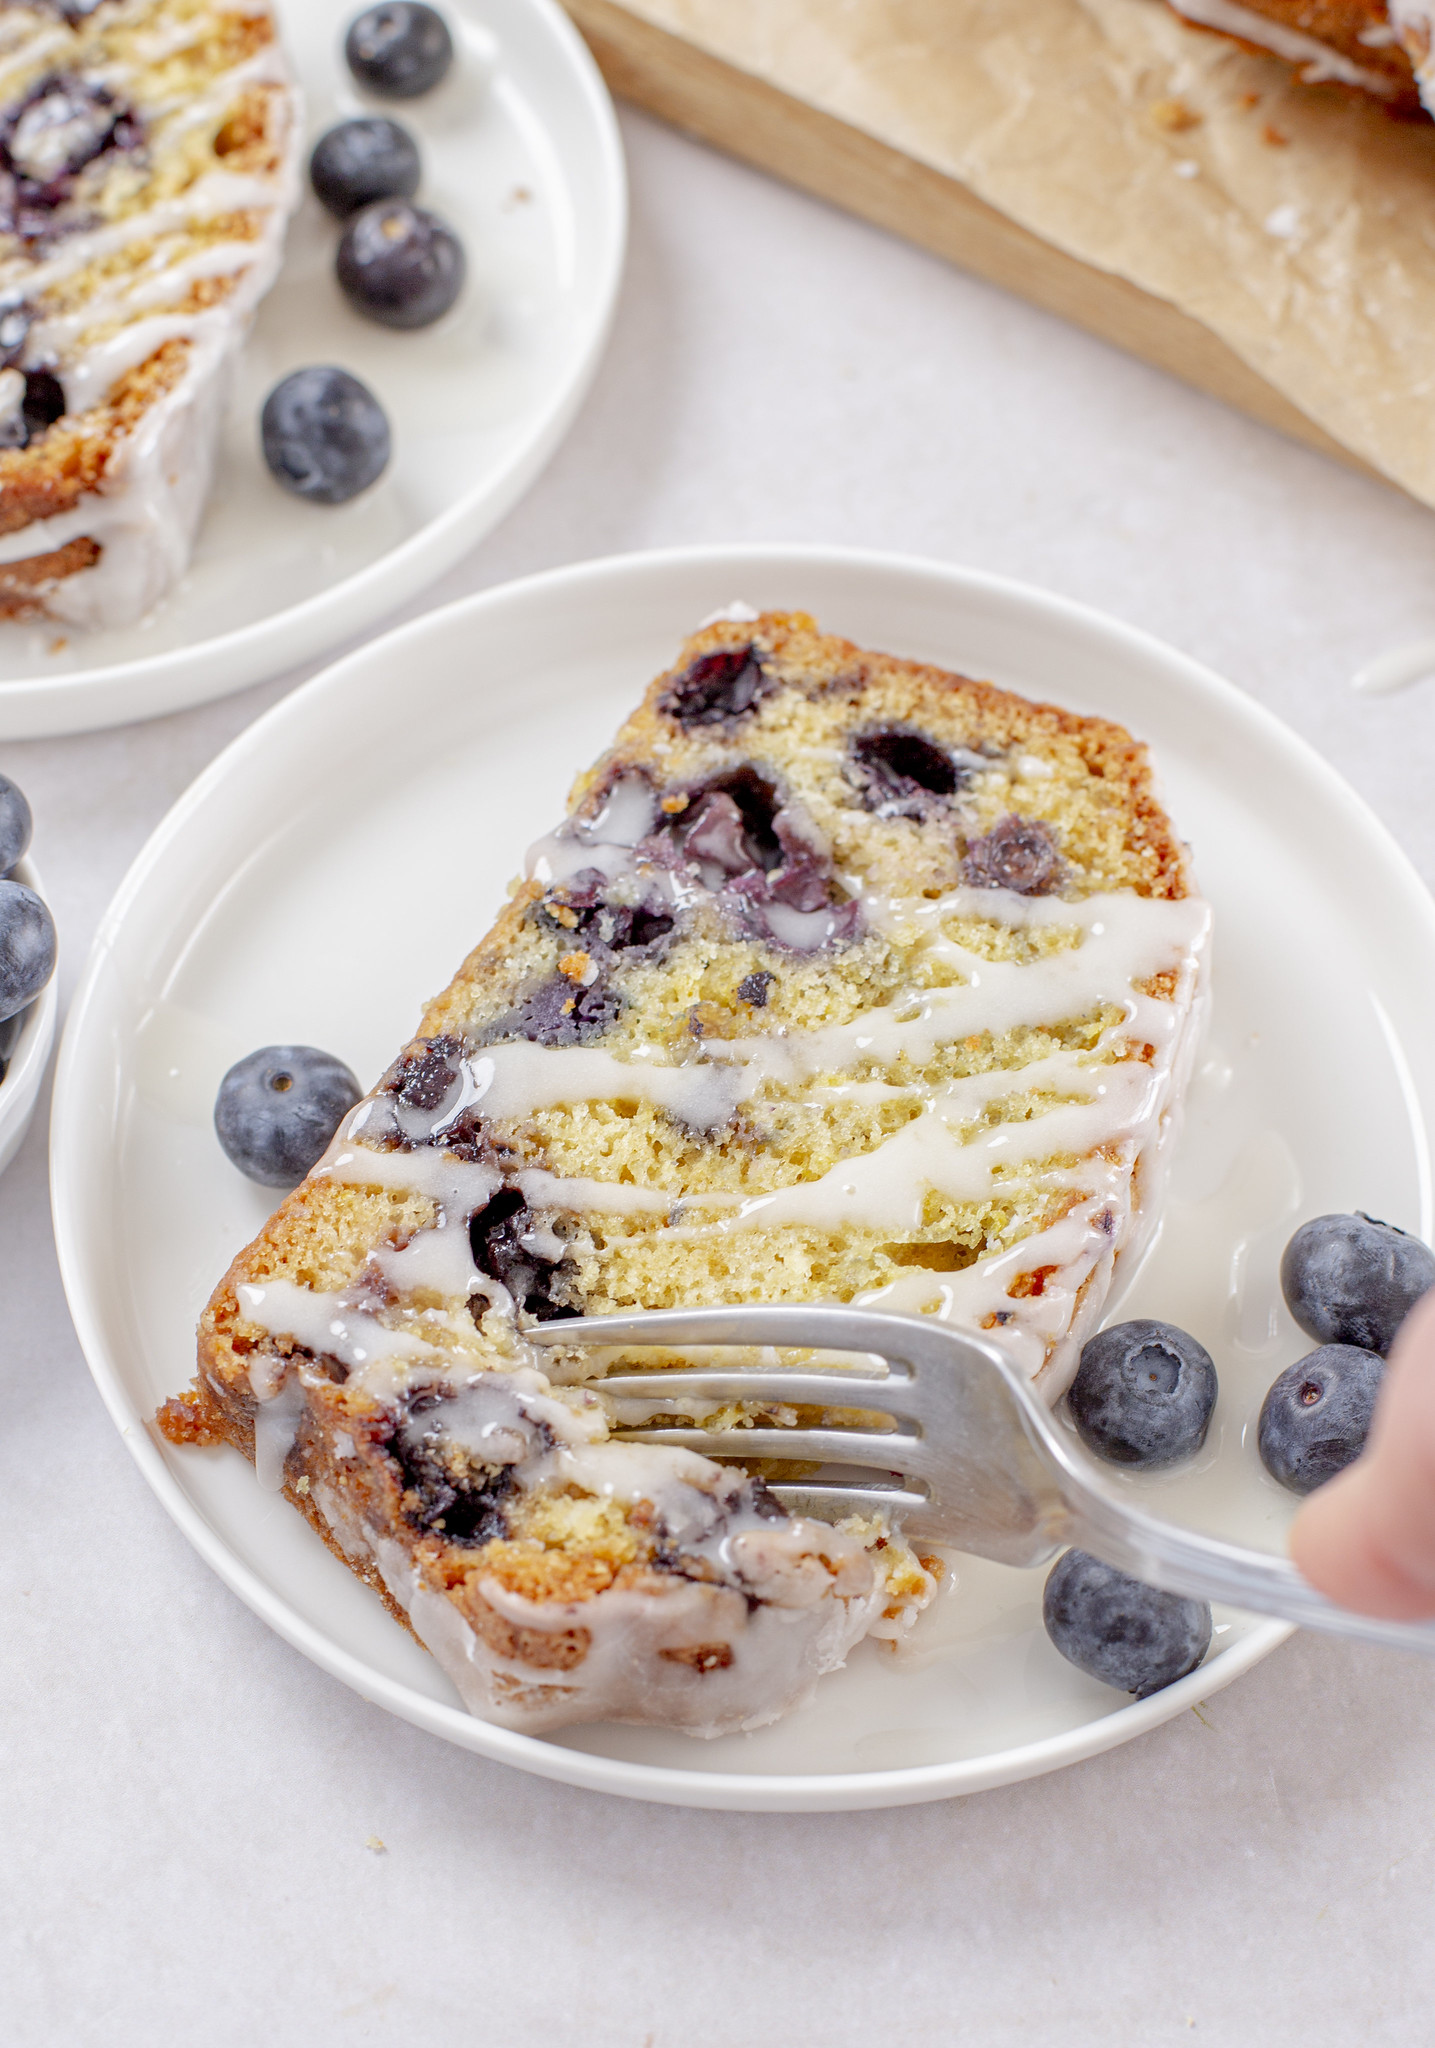 Slice of blueberry lemon loaf cake on a plate with glaze drizzled on top